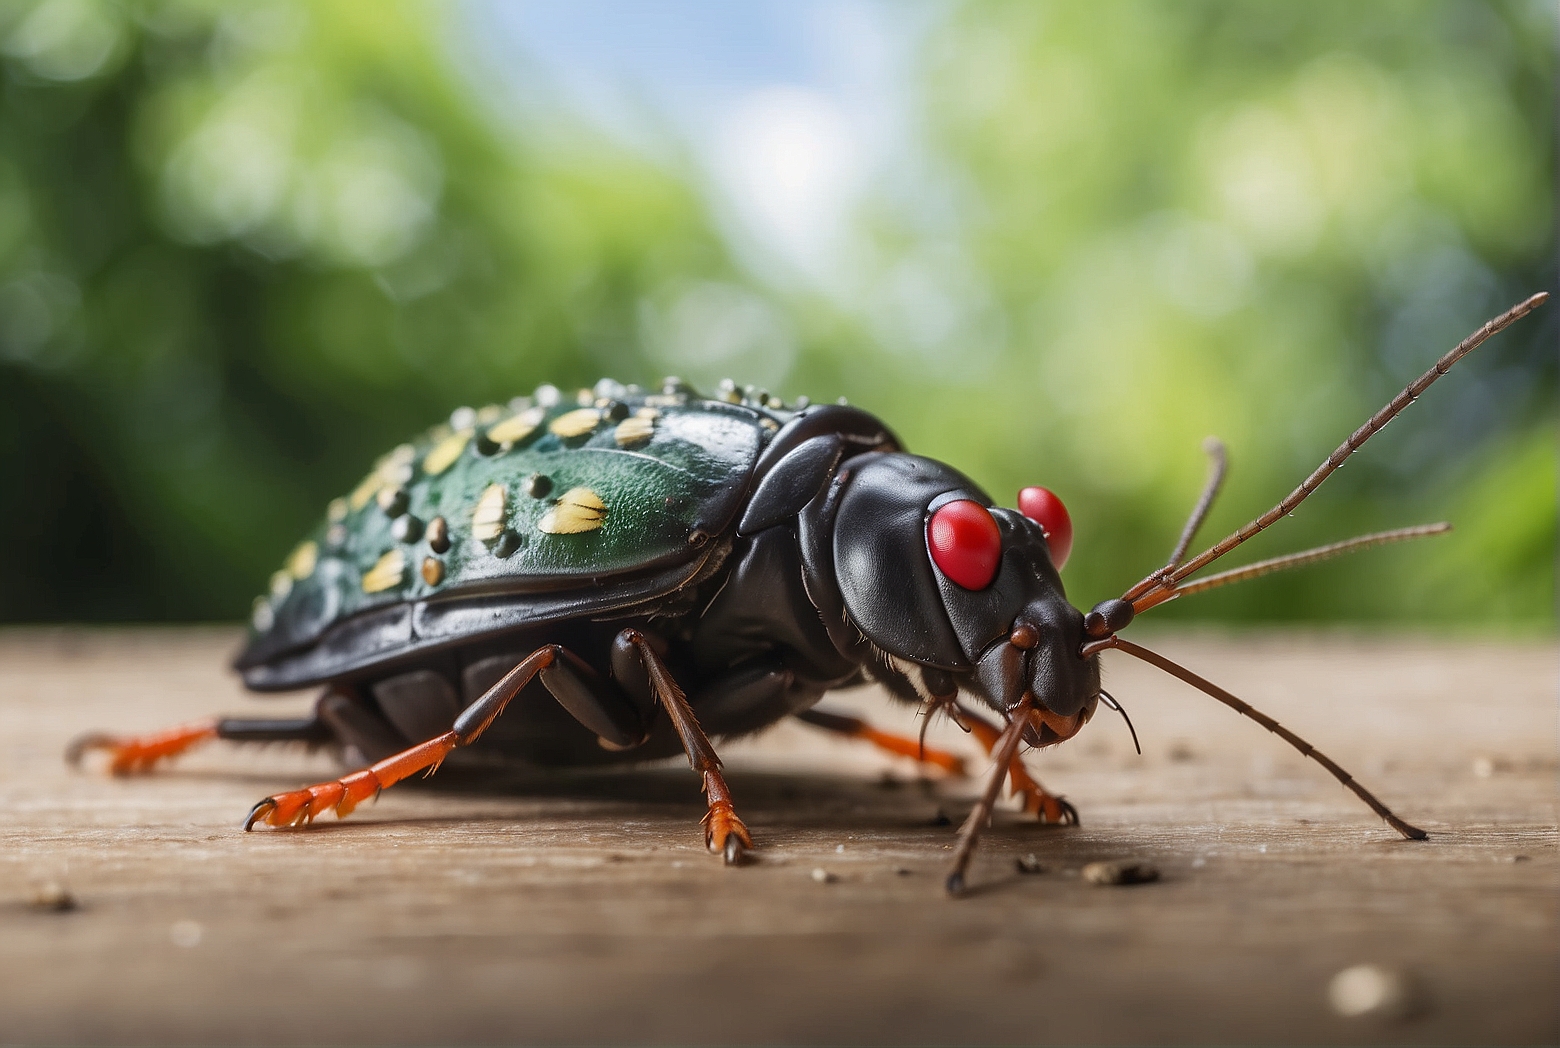 Comparing 5 Pest Control Products: Which is Best for You?